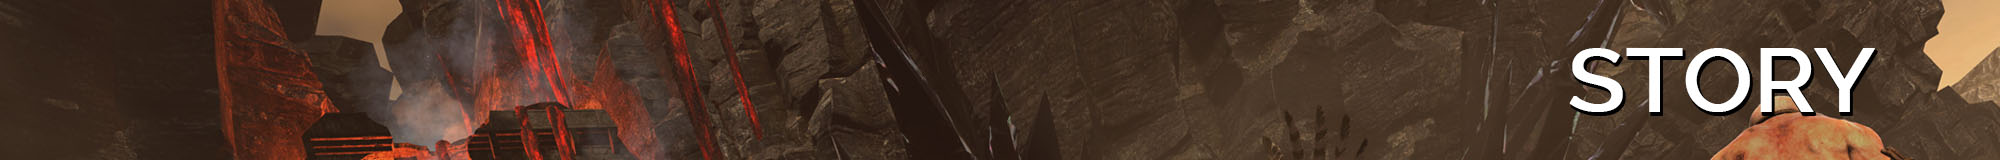 Banner_0000_STORY